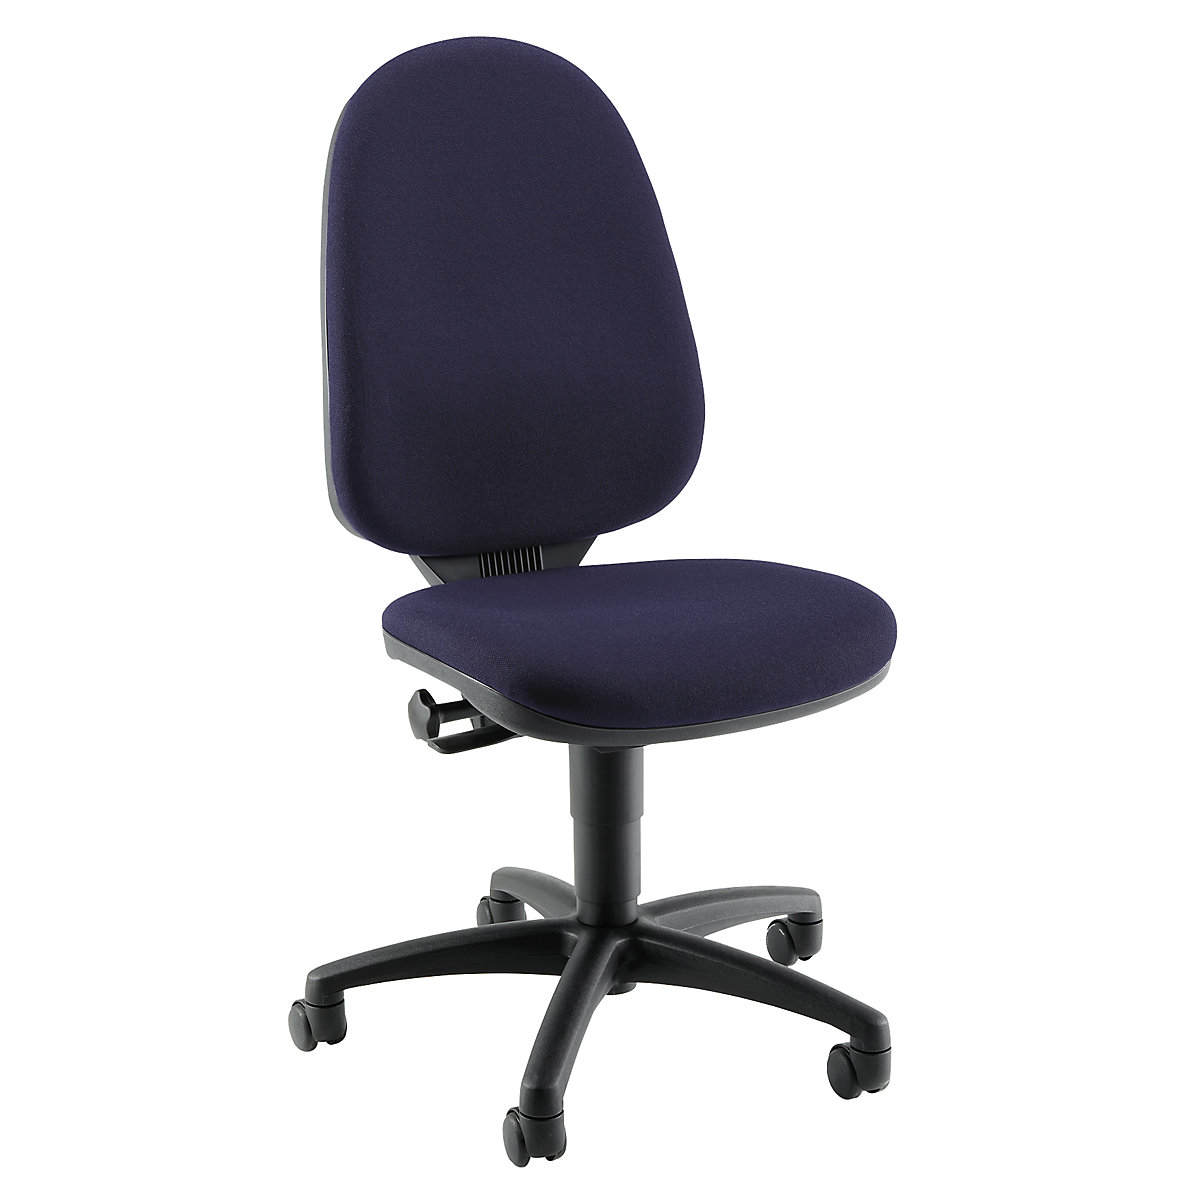 Standard swivel chair – Topstar, without arm rests, back rest 550 mm, frame black, fabric blue-6